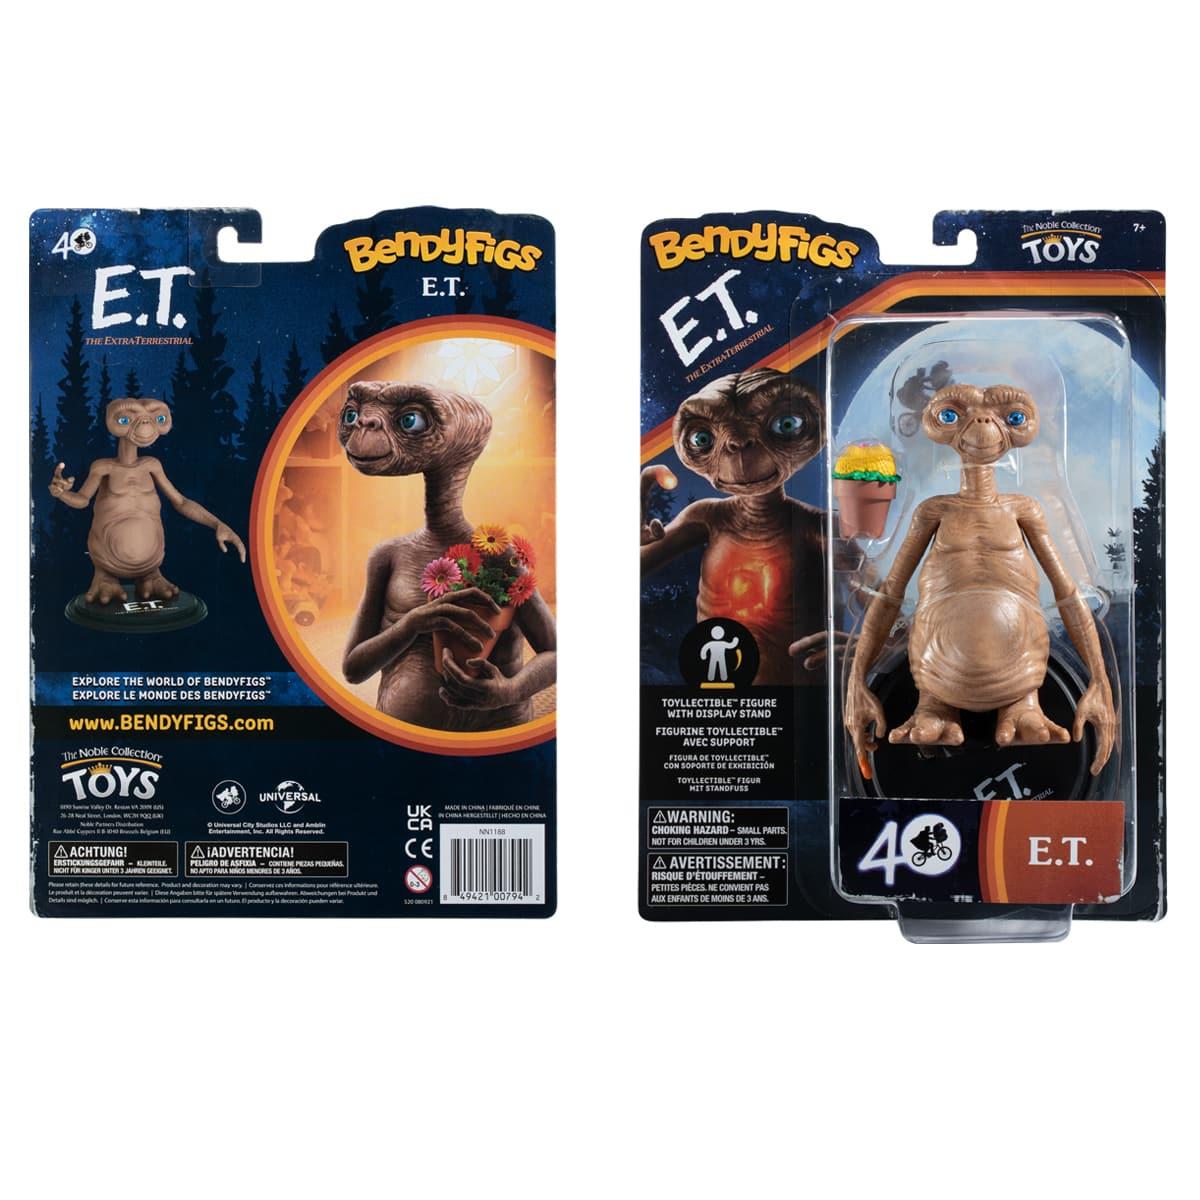 E.T. — The Noble Collection UK